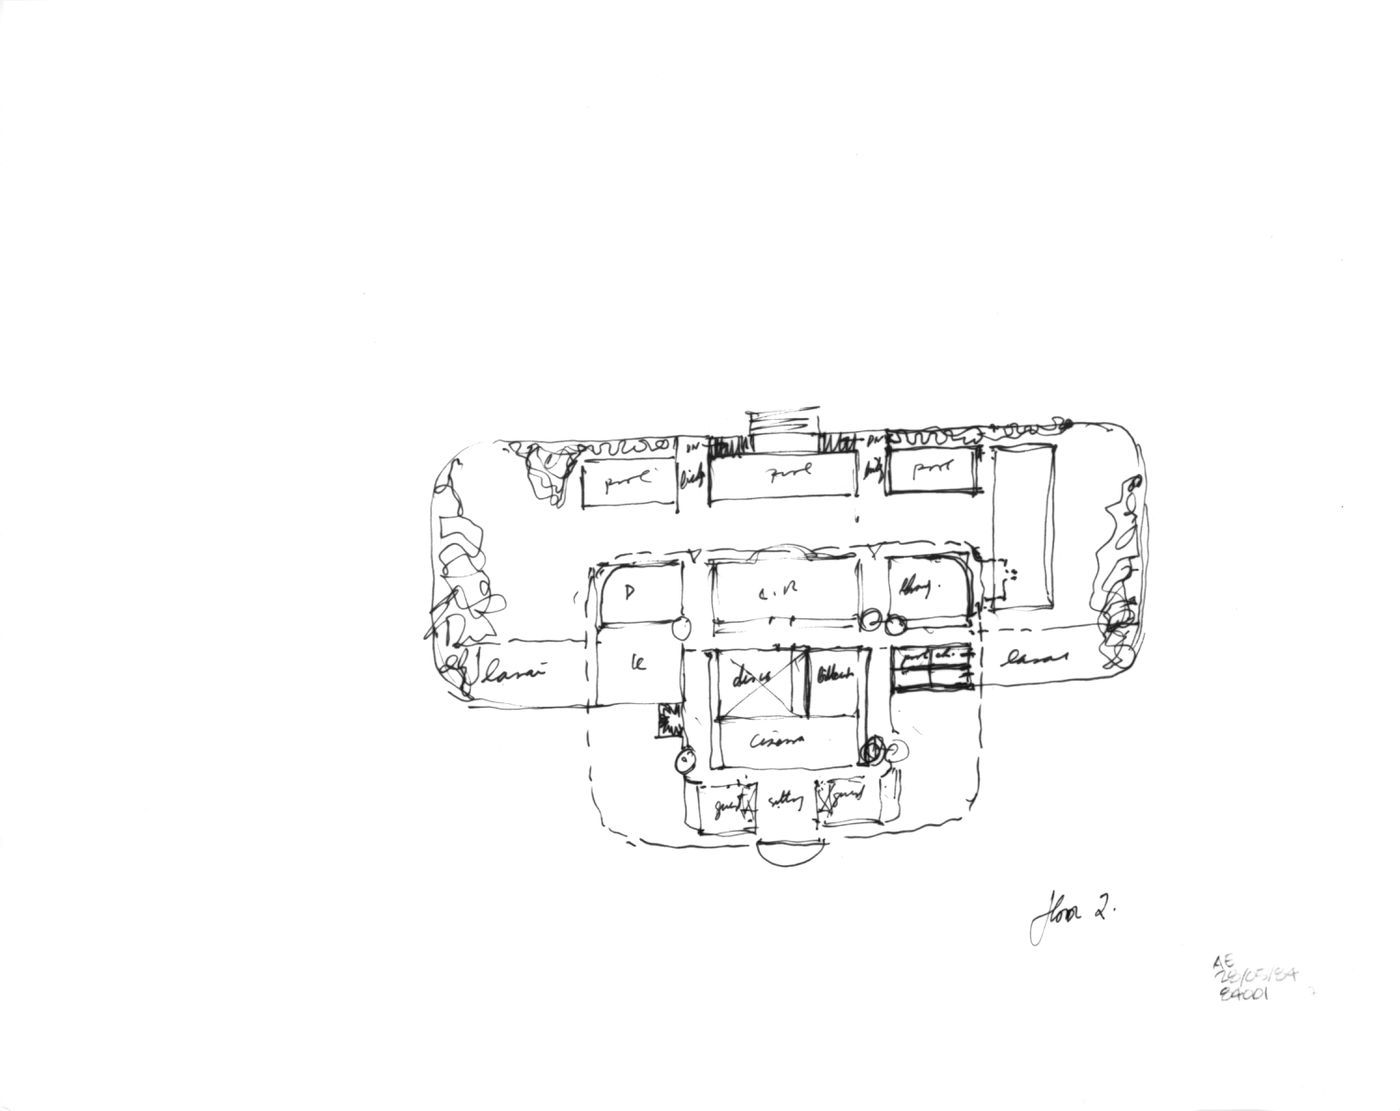 Plan development sketches for floor two, and floors three, four, and five